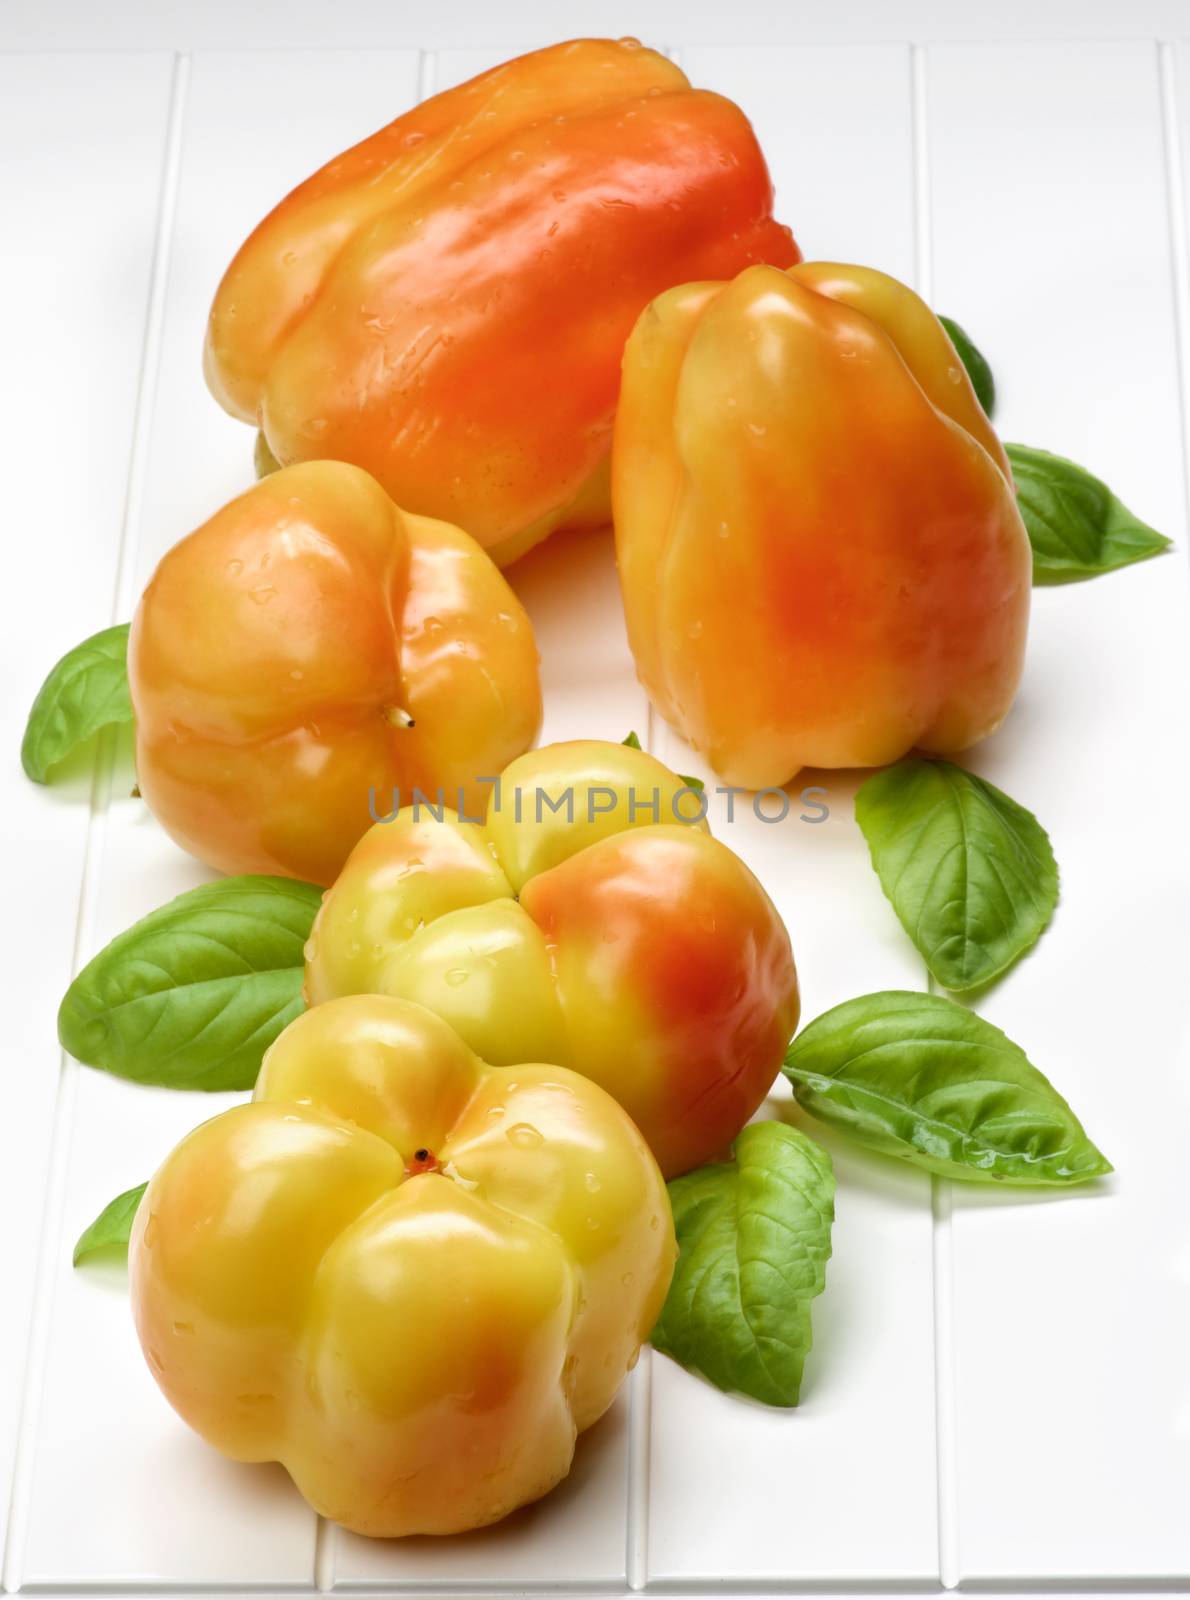 Yellow and Orange Bell Peppers by zhekos